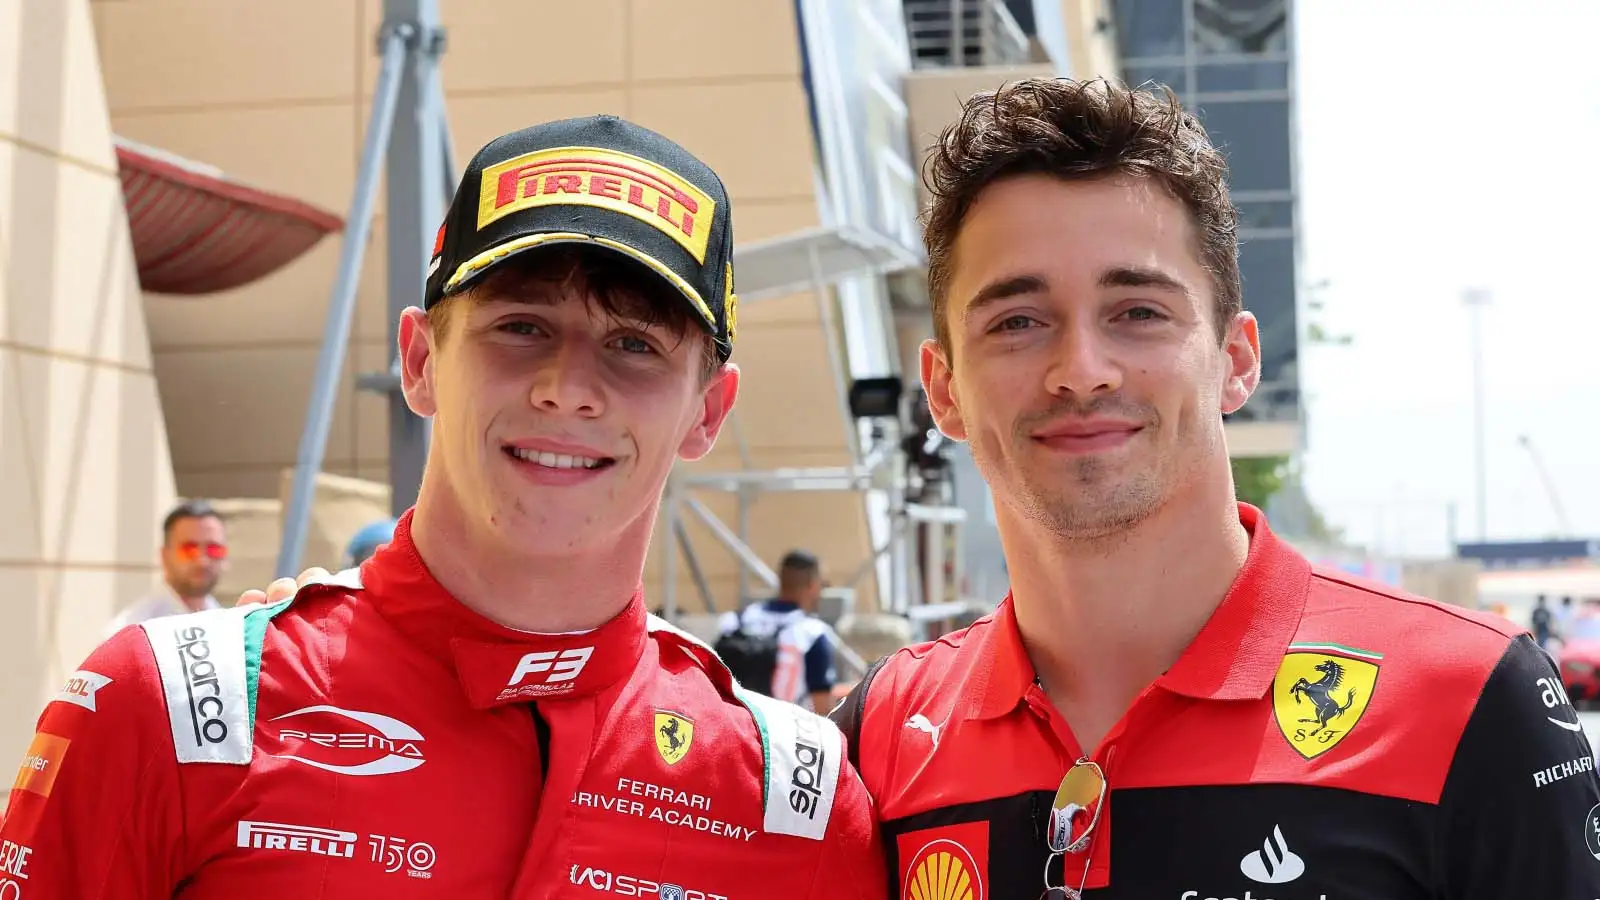 Arthur Leclerc with brother and Ferrari driver Charles. Bahrain March 2022.